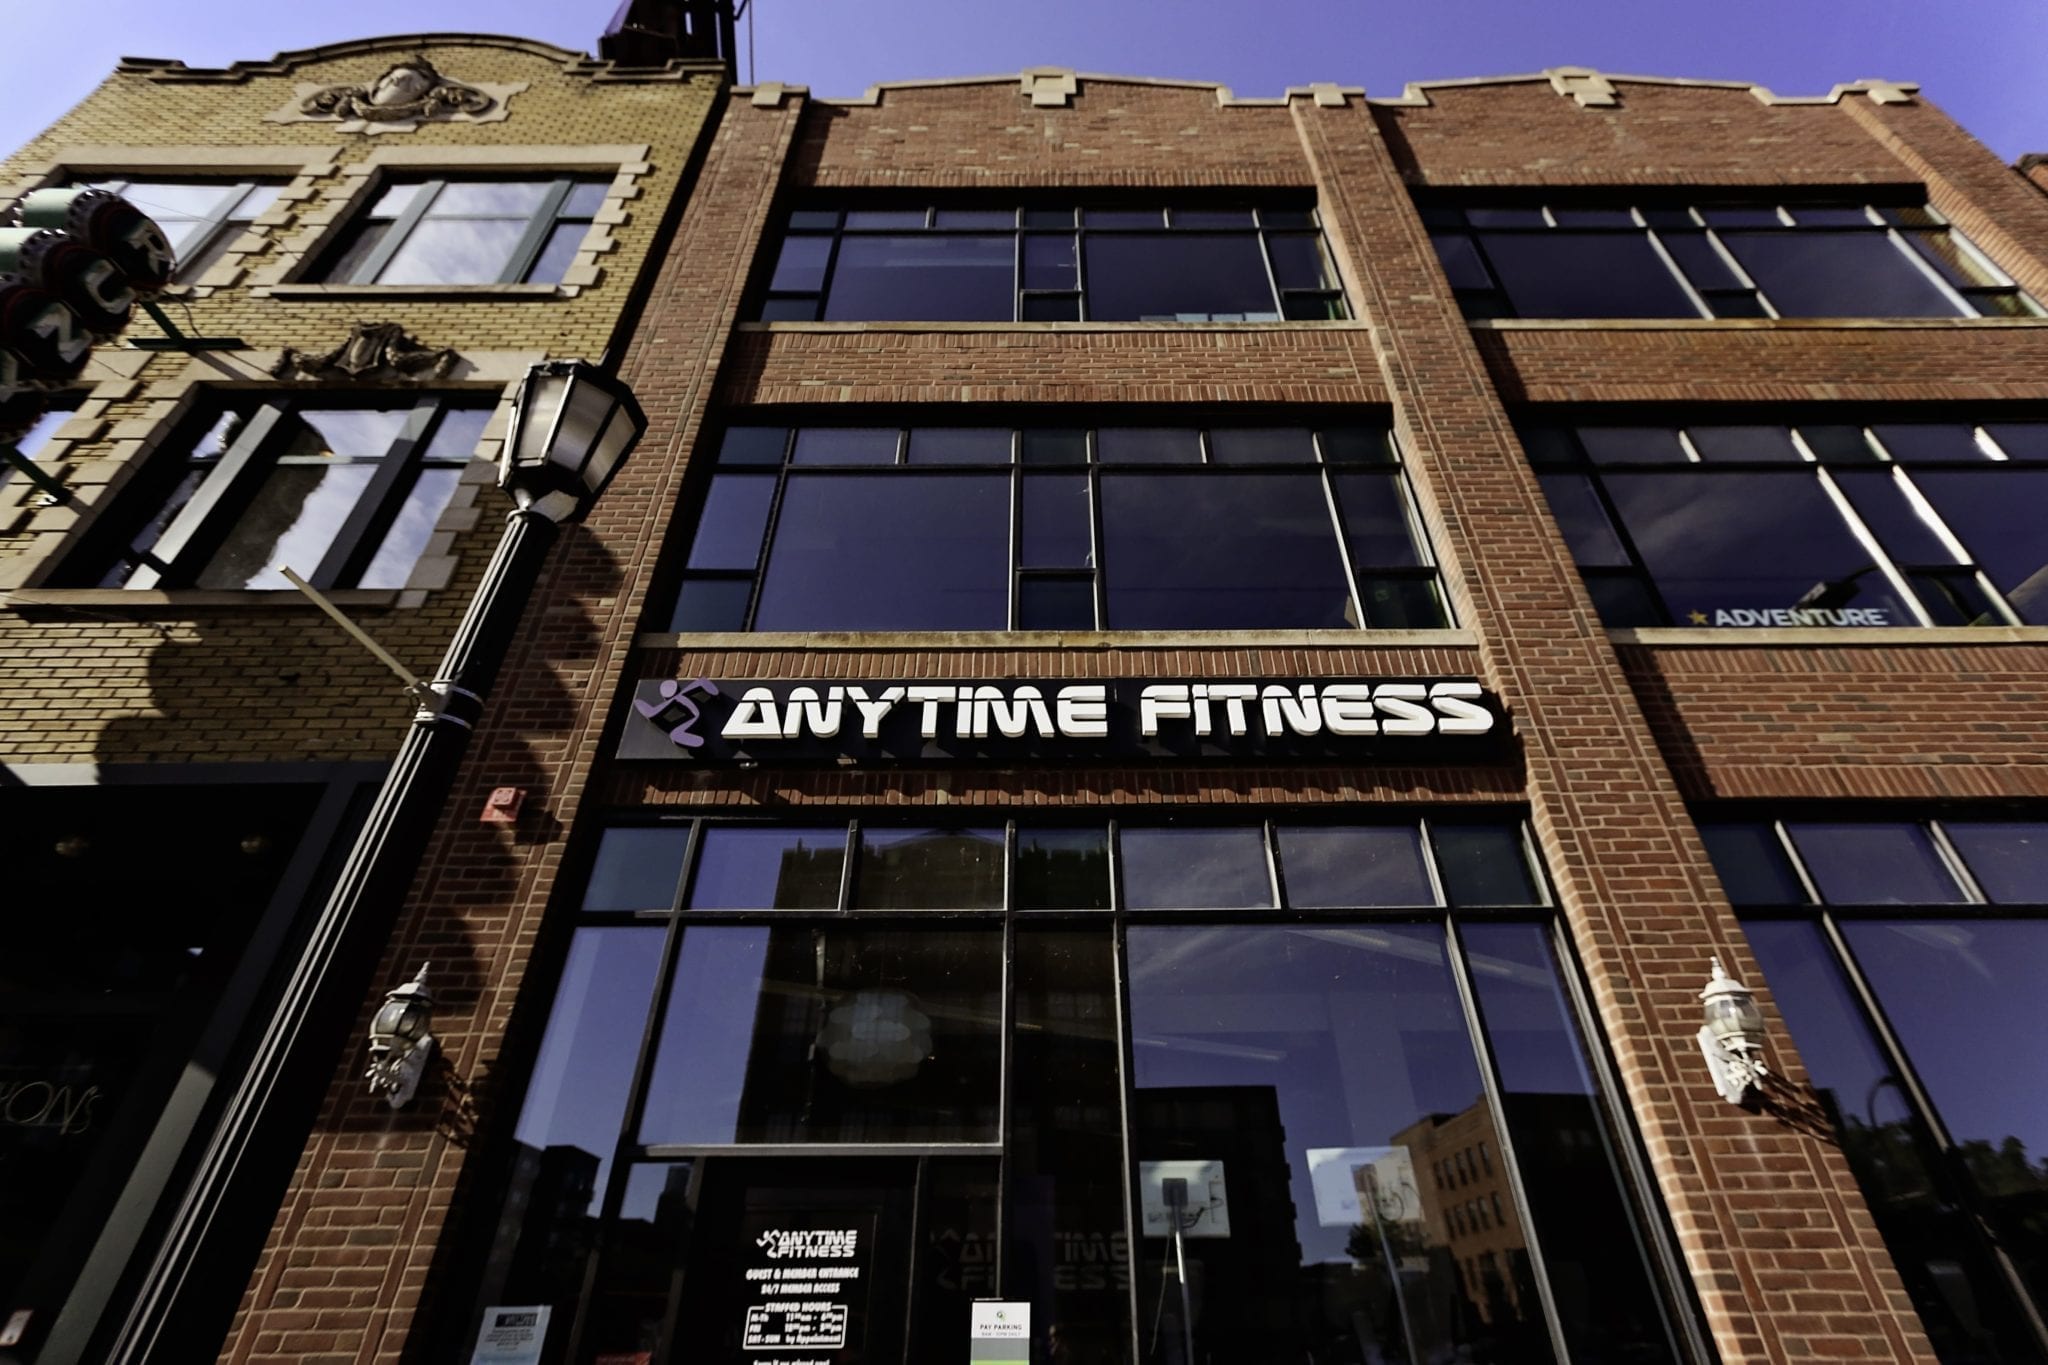 Image courtesy of Anytime Fitness.